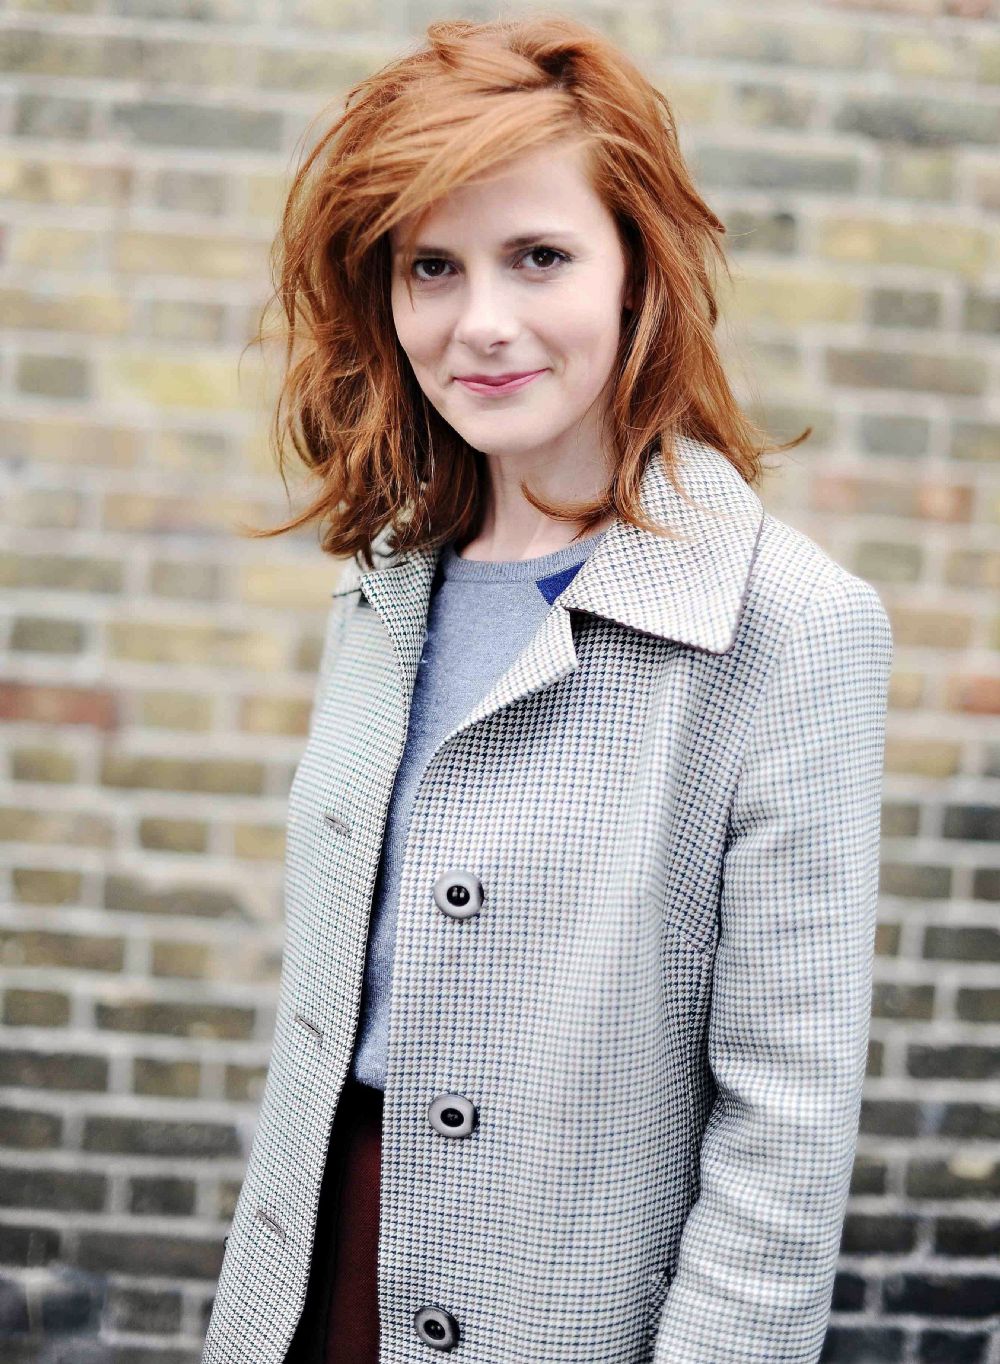 Who is Louise Brealey dating? Louise Brealey boyfriend, husband